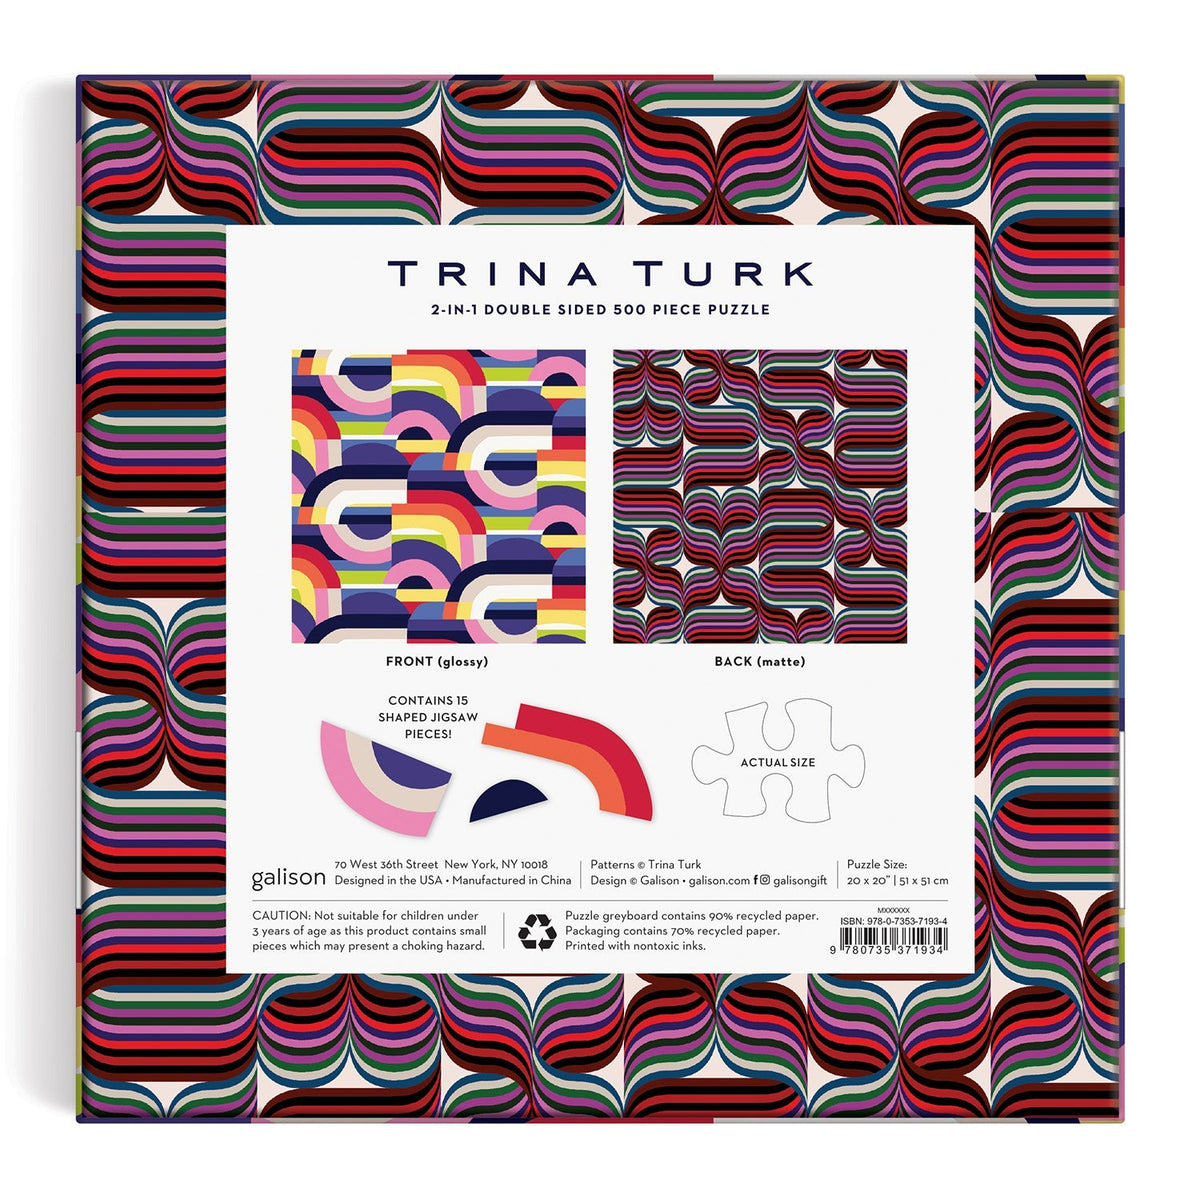 Trina Turk 500 Piece Double Sided Puzzle with Shaped Pieces